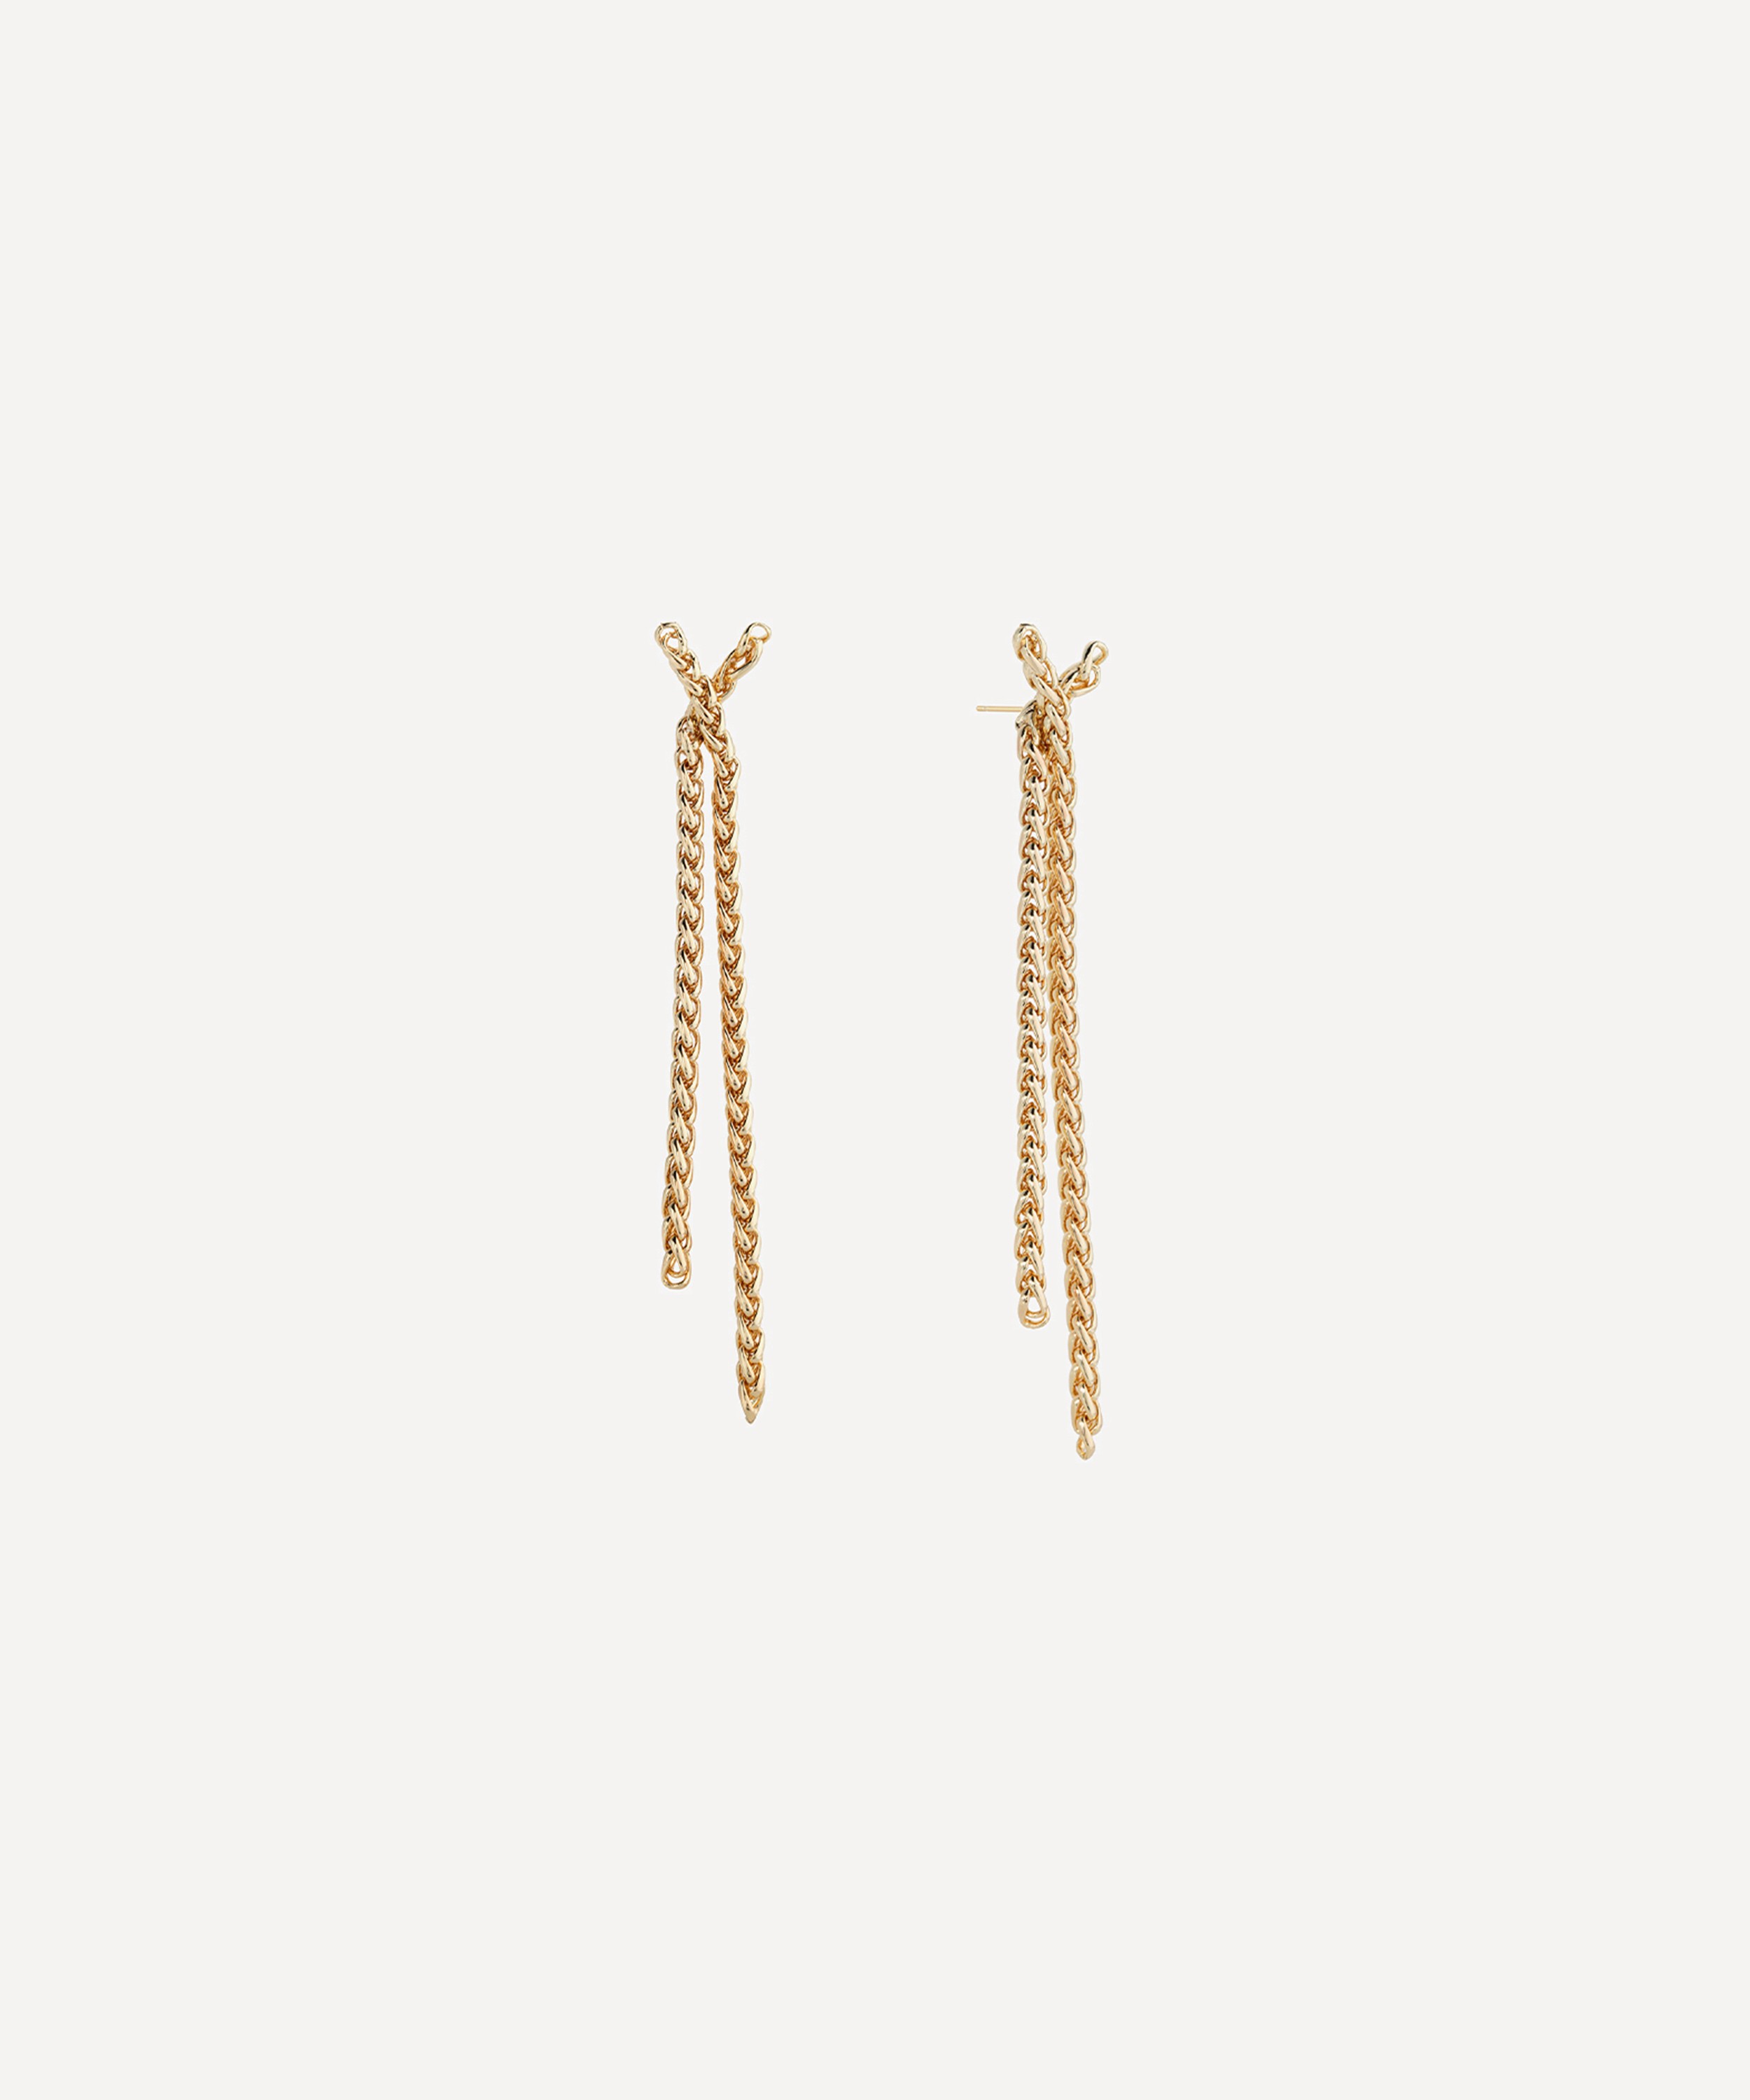 SHASHI - 14ct Gold-Plated Olympia Drop Earrings